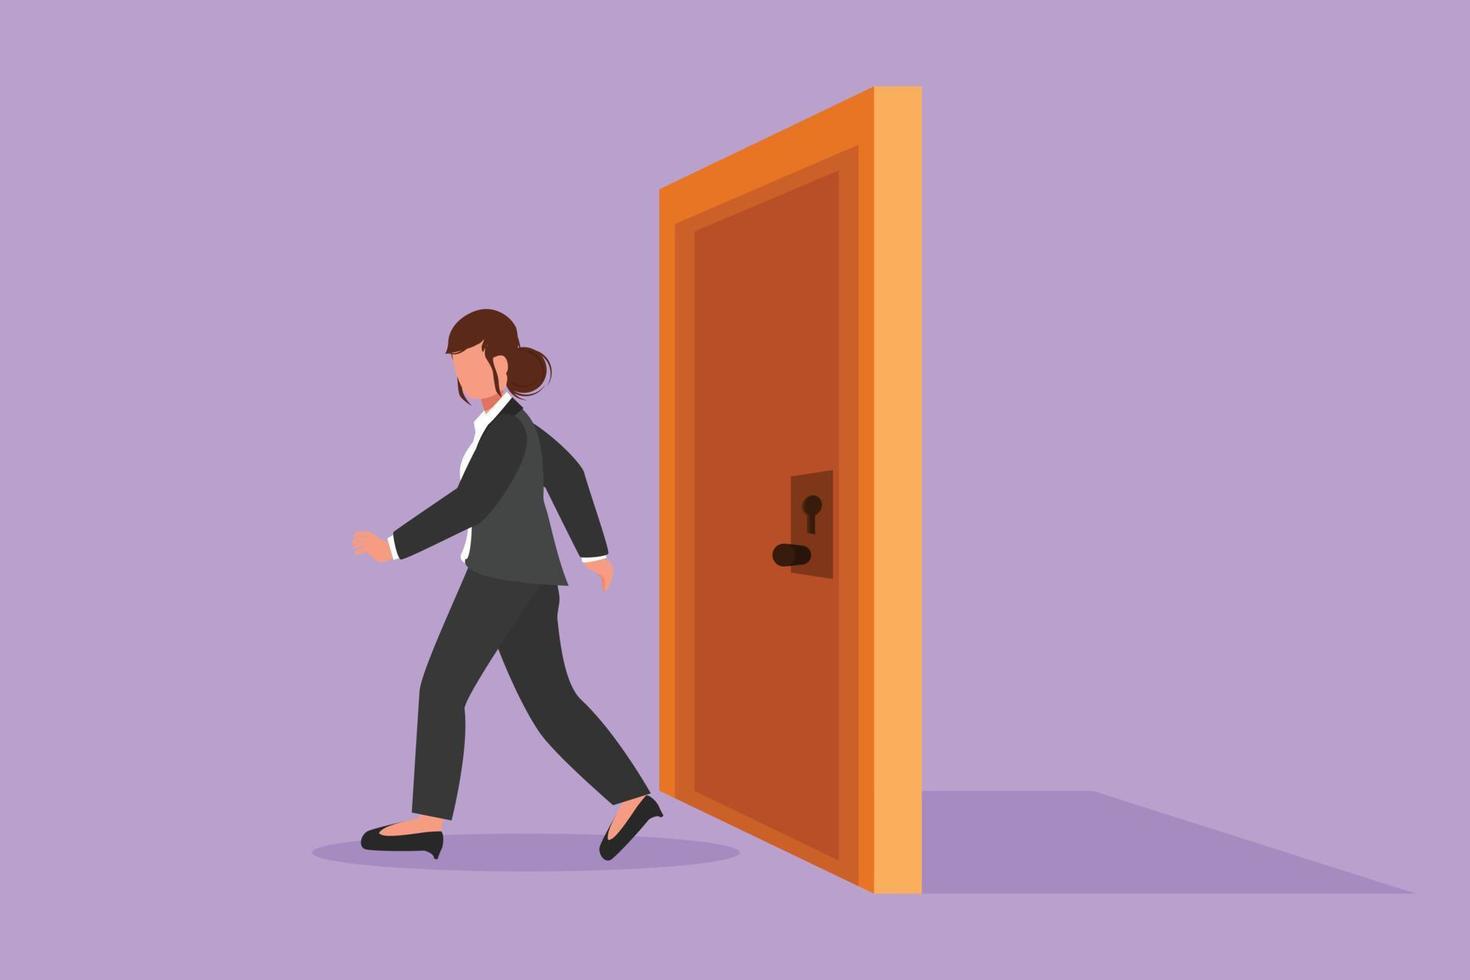 Graphic flat design drawing businesswoman walking and leaving closed door. New business ventures. Entrepreneur entering new market. Career growth or vision metaphor. Cartoon style vector illustration